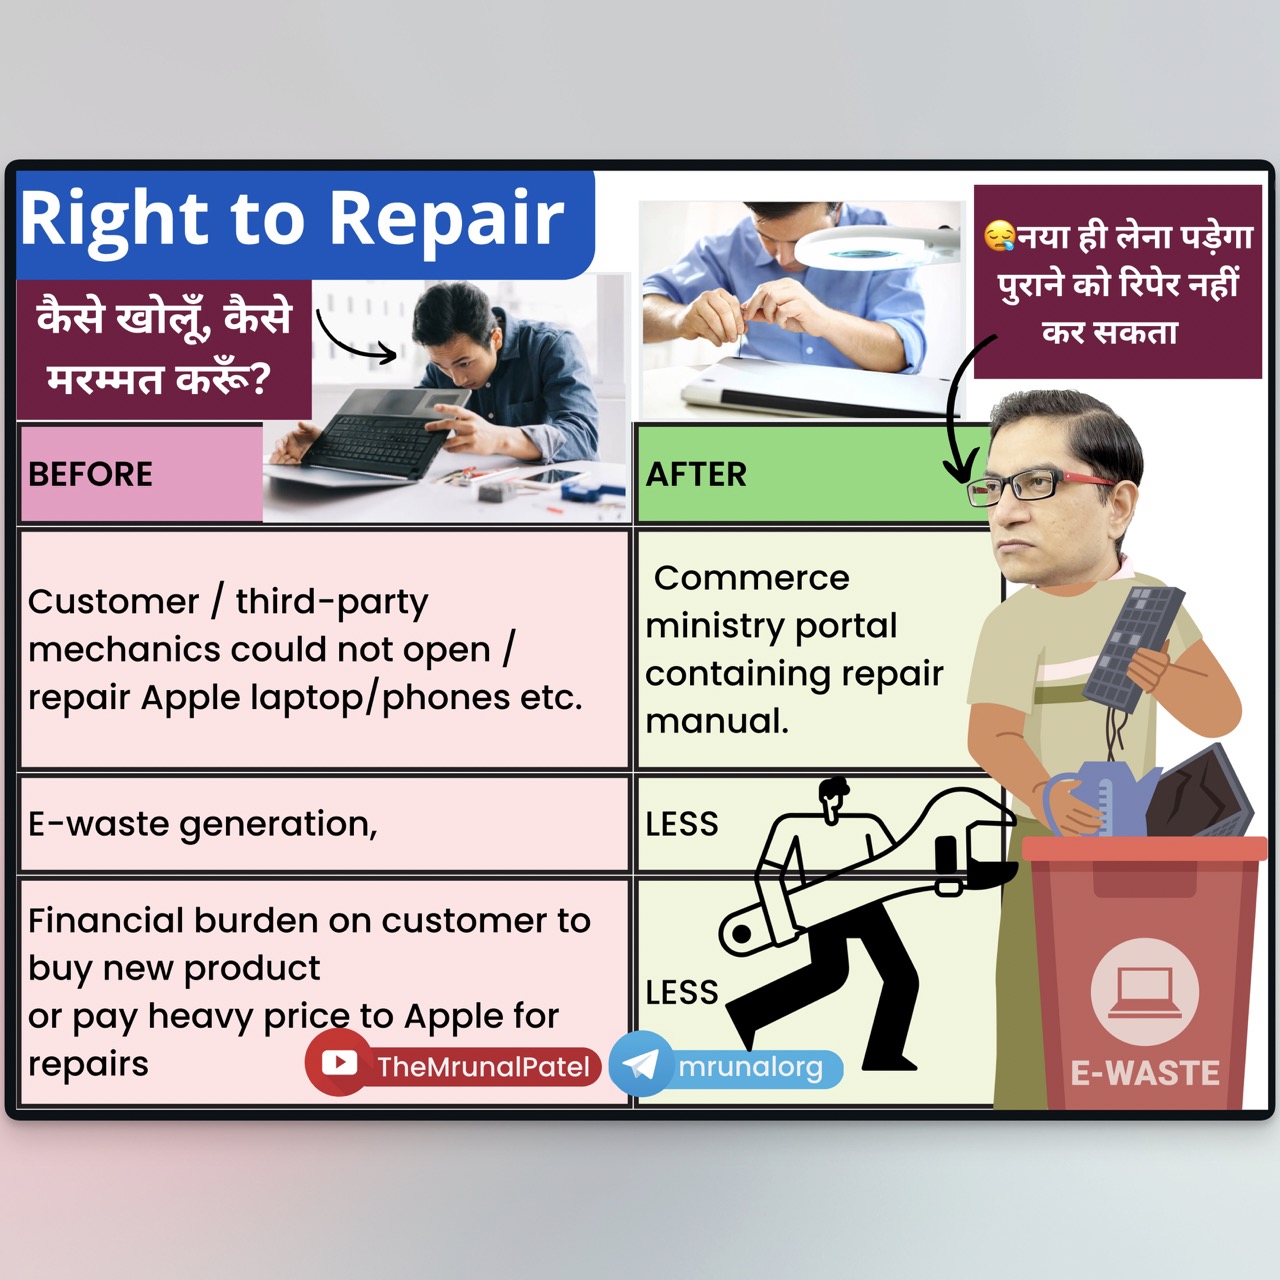 Commerce ministry opened the right to repair portal. Companies will have to compulsorily the upload the repair manuals. so that consumers can get product repaired by themselves or by a third party, rather than depending on the manufacturers.